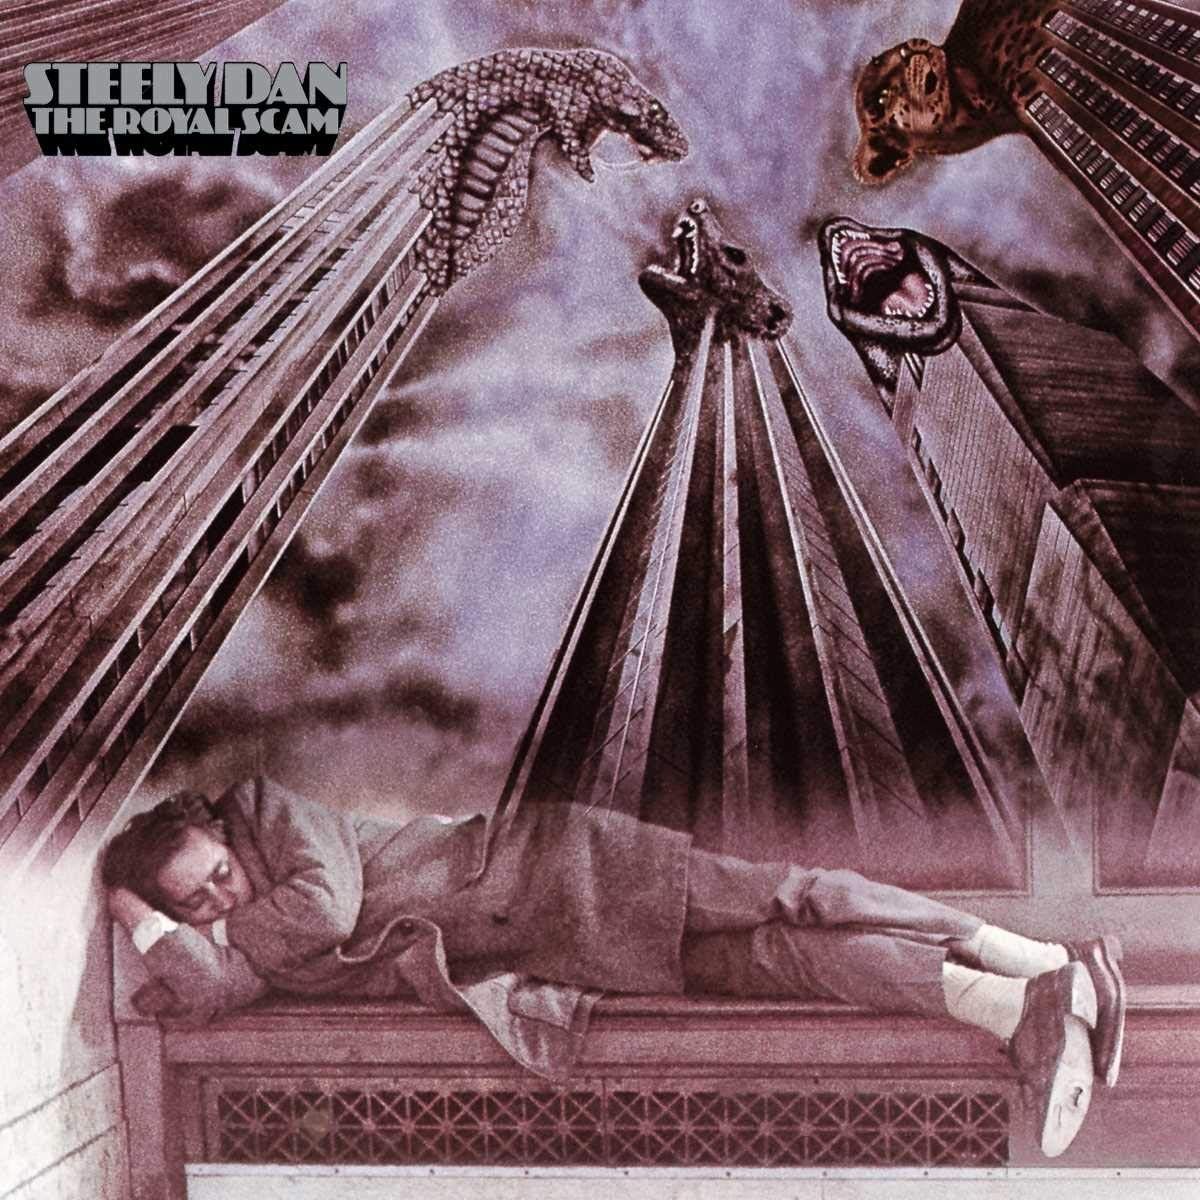 Steely Dan - Royal Scam, The (1999 remaster) (Euro.) - CD - New